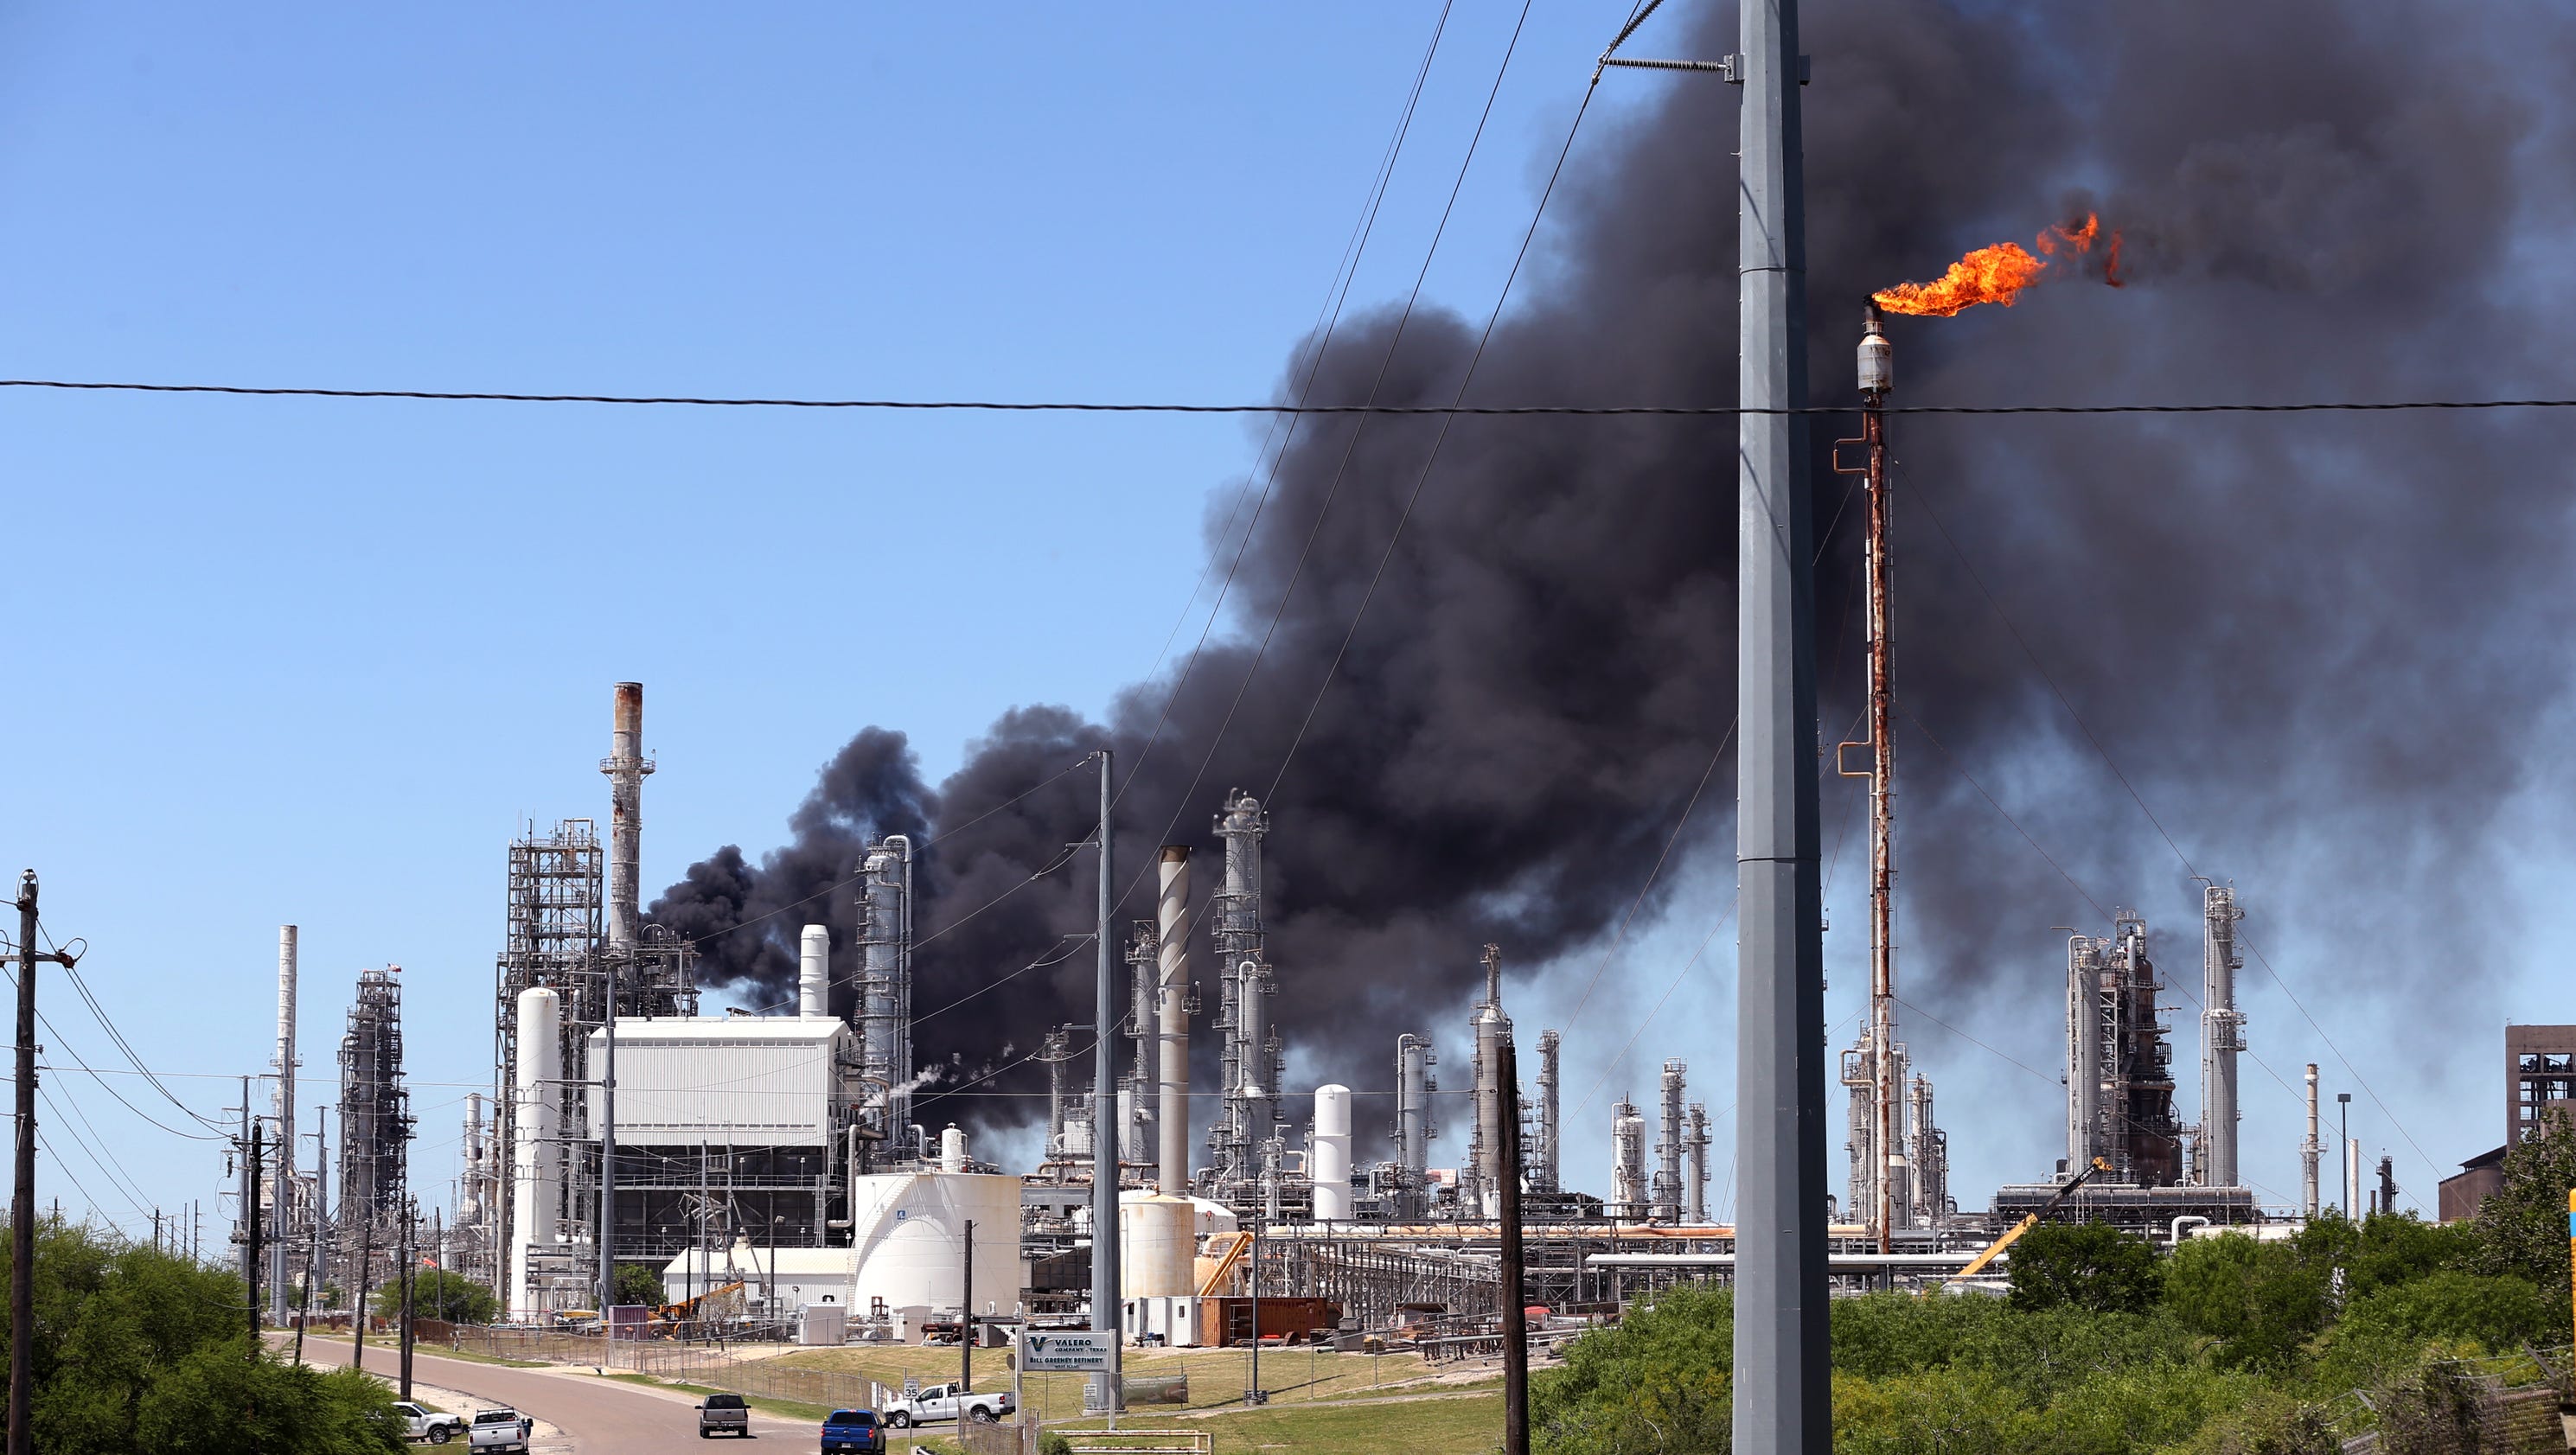 Corpus Christi Valero plant smoke seen for miles after power outage